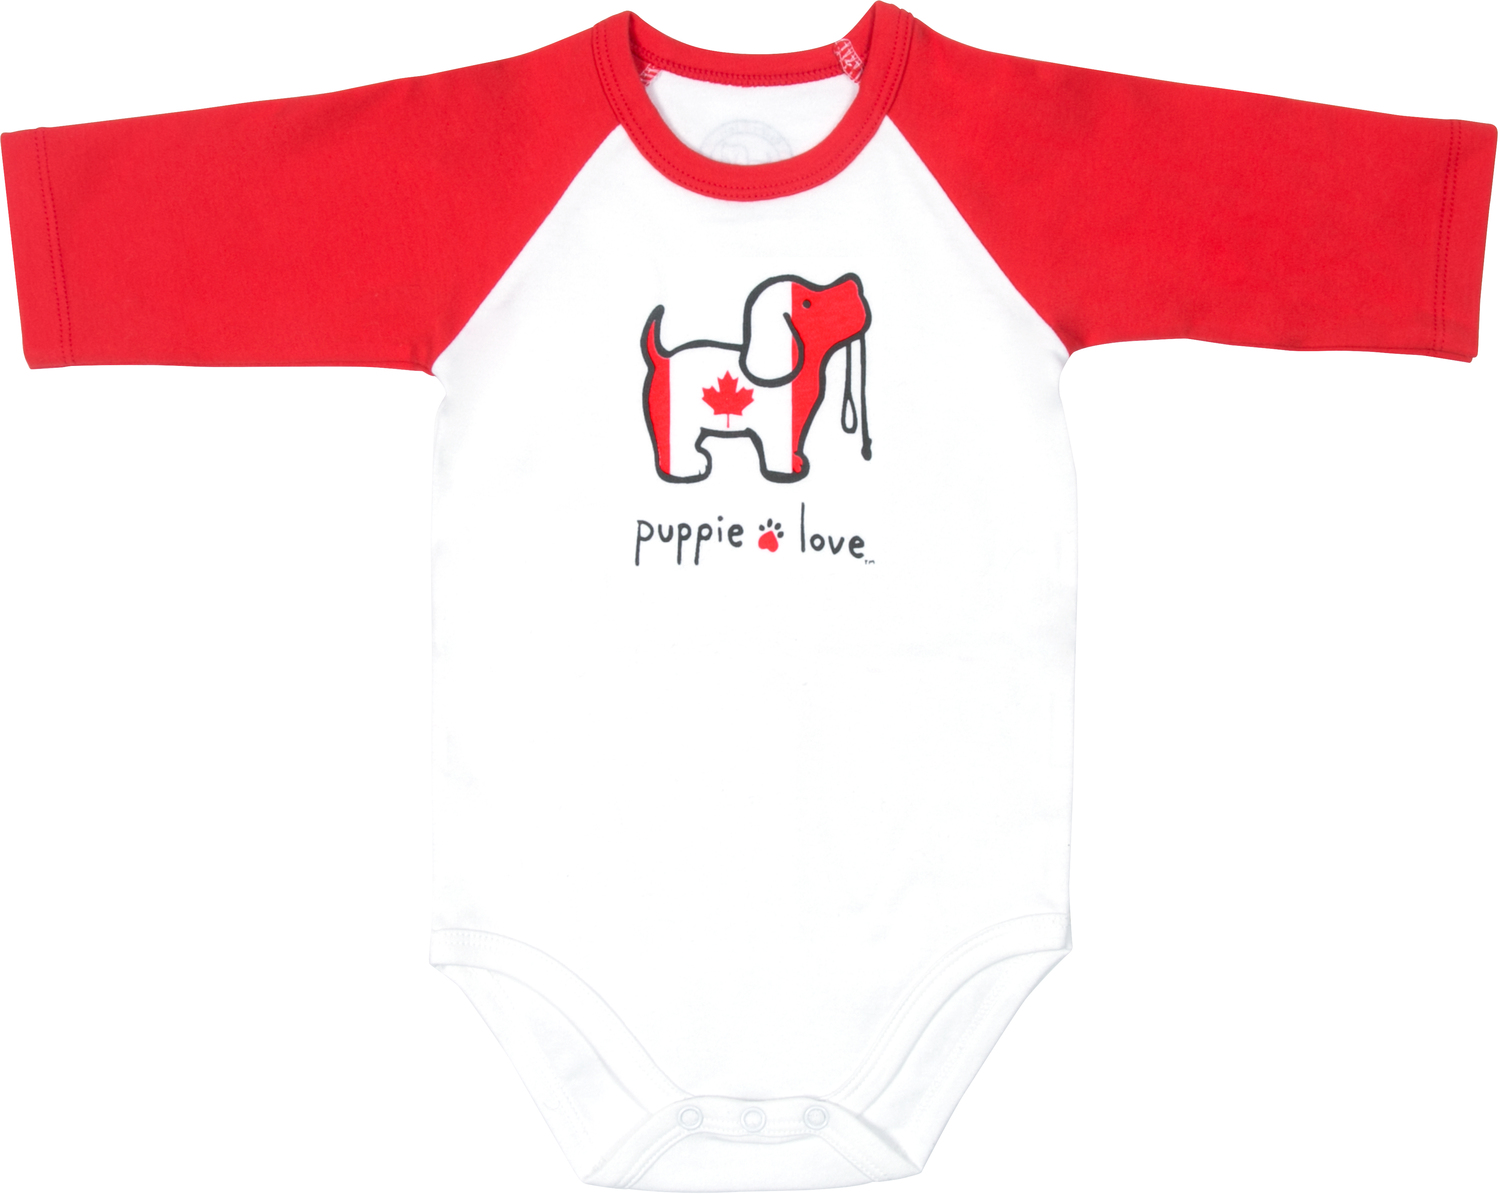 Canada by Puppie Love - Canada - 6-12 Months
3/4 Length Red Sleeve Onesie